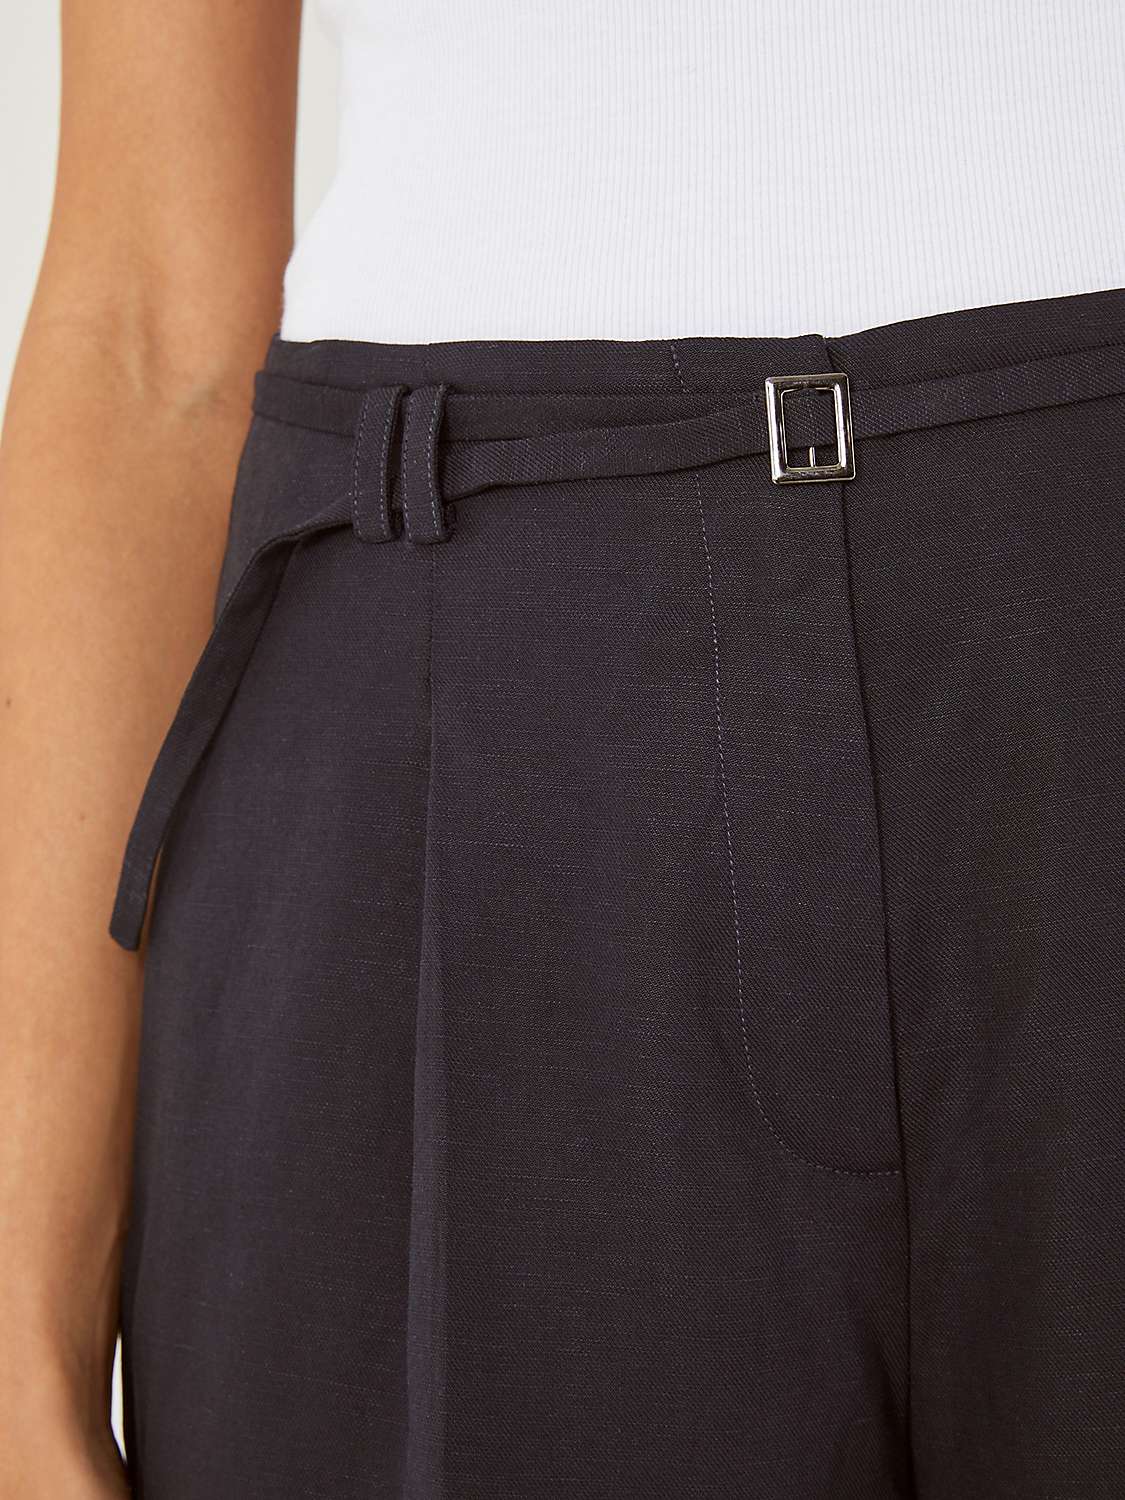 Buy HUSH Belted Tailored Shorts, Midnight Online at johnlewis.com